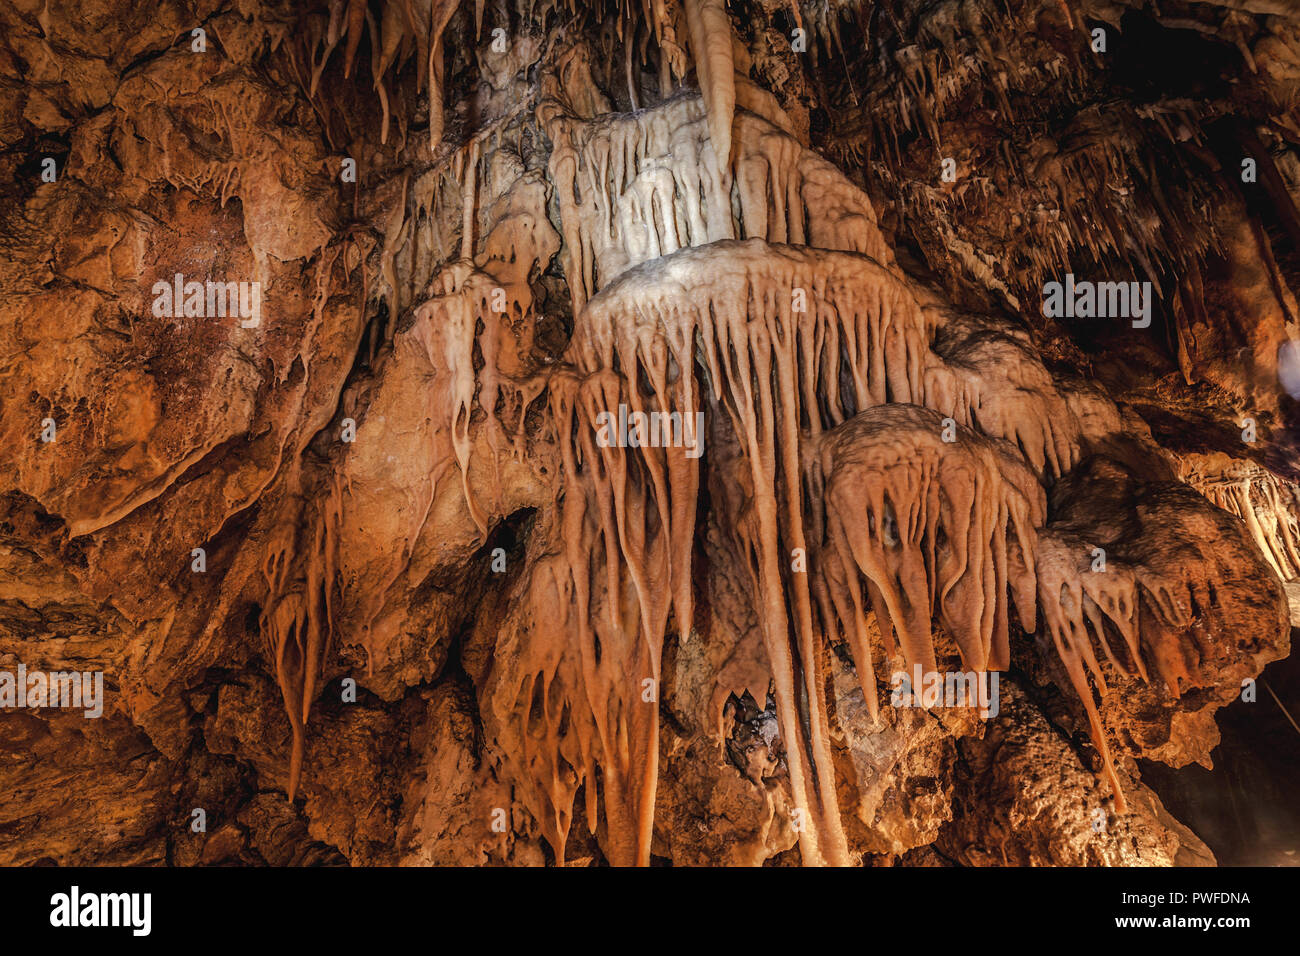 Intricate geologic formations in a cave Stock Photo